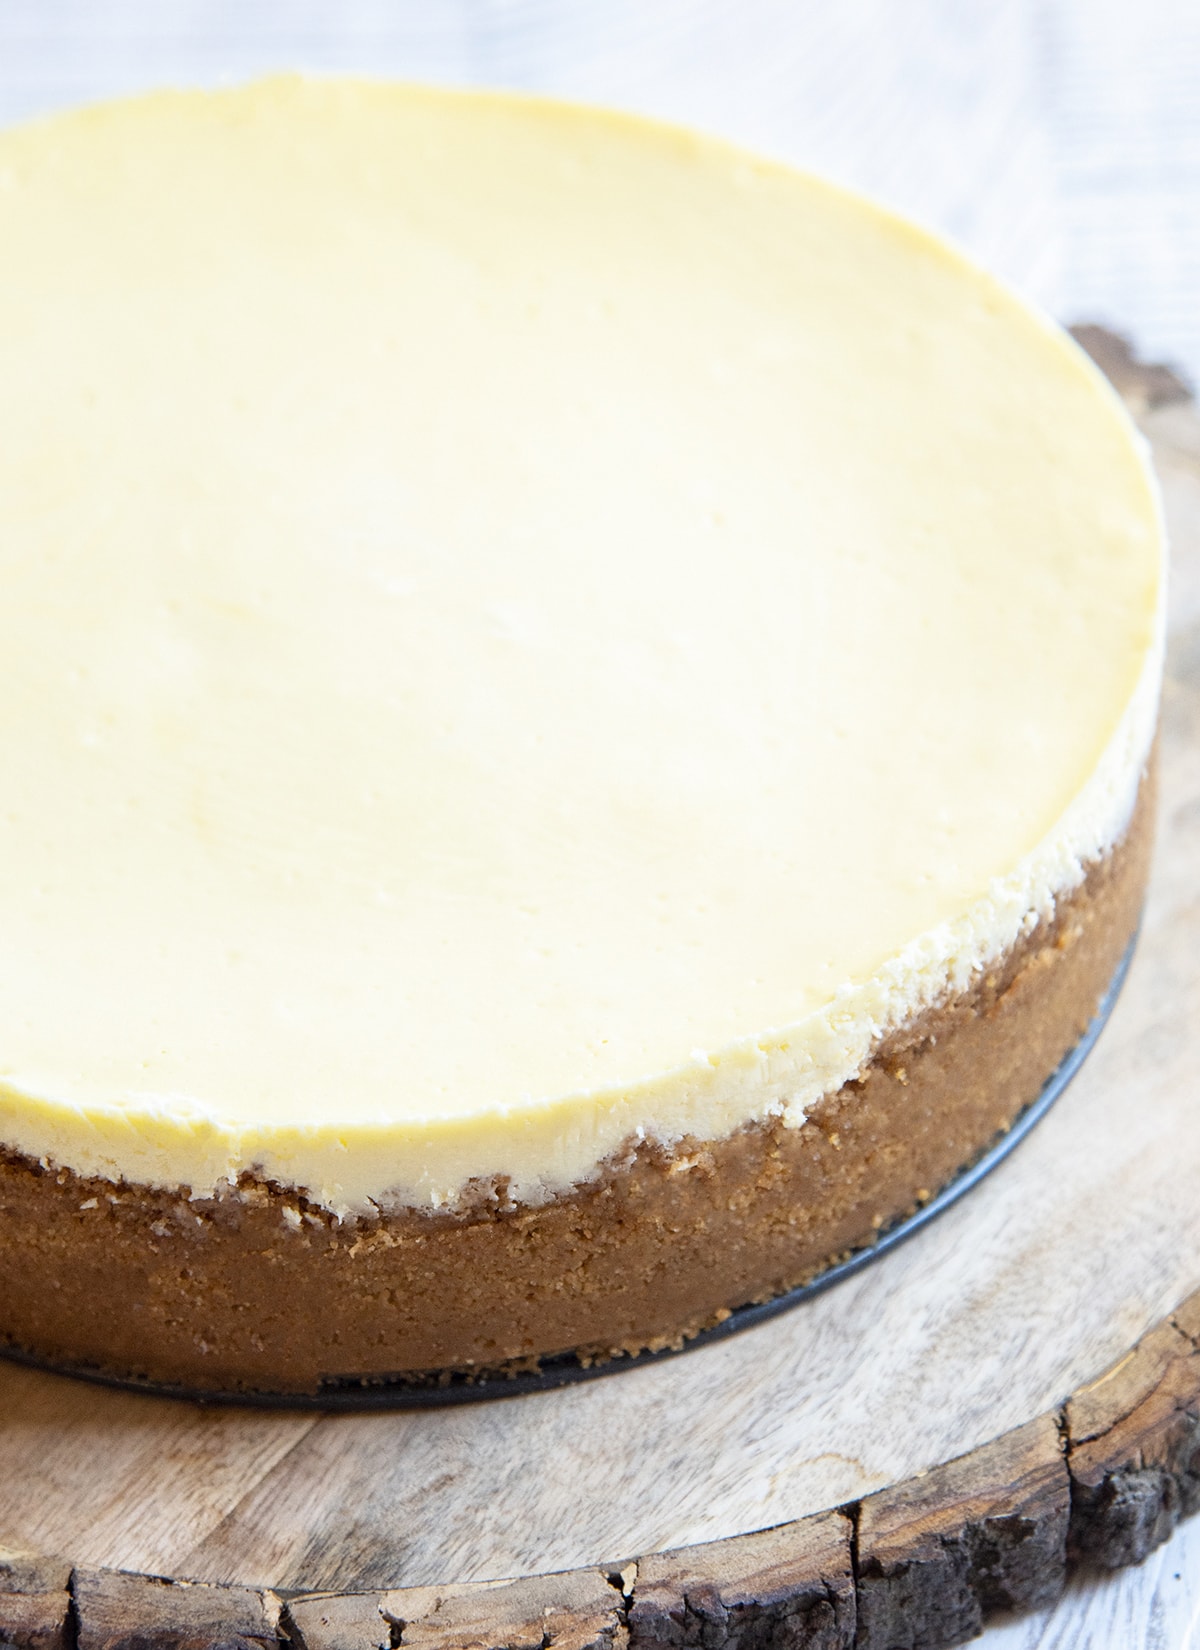 A whole classic cheesecake on a wooden board, with a smooth top, and graham cracker crust on the sides.